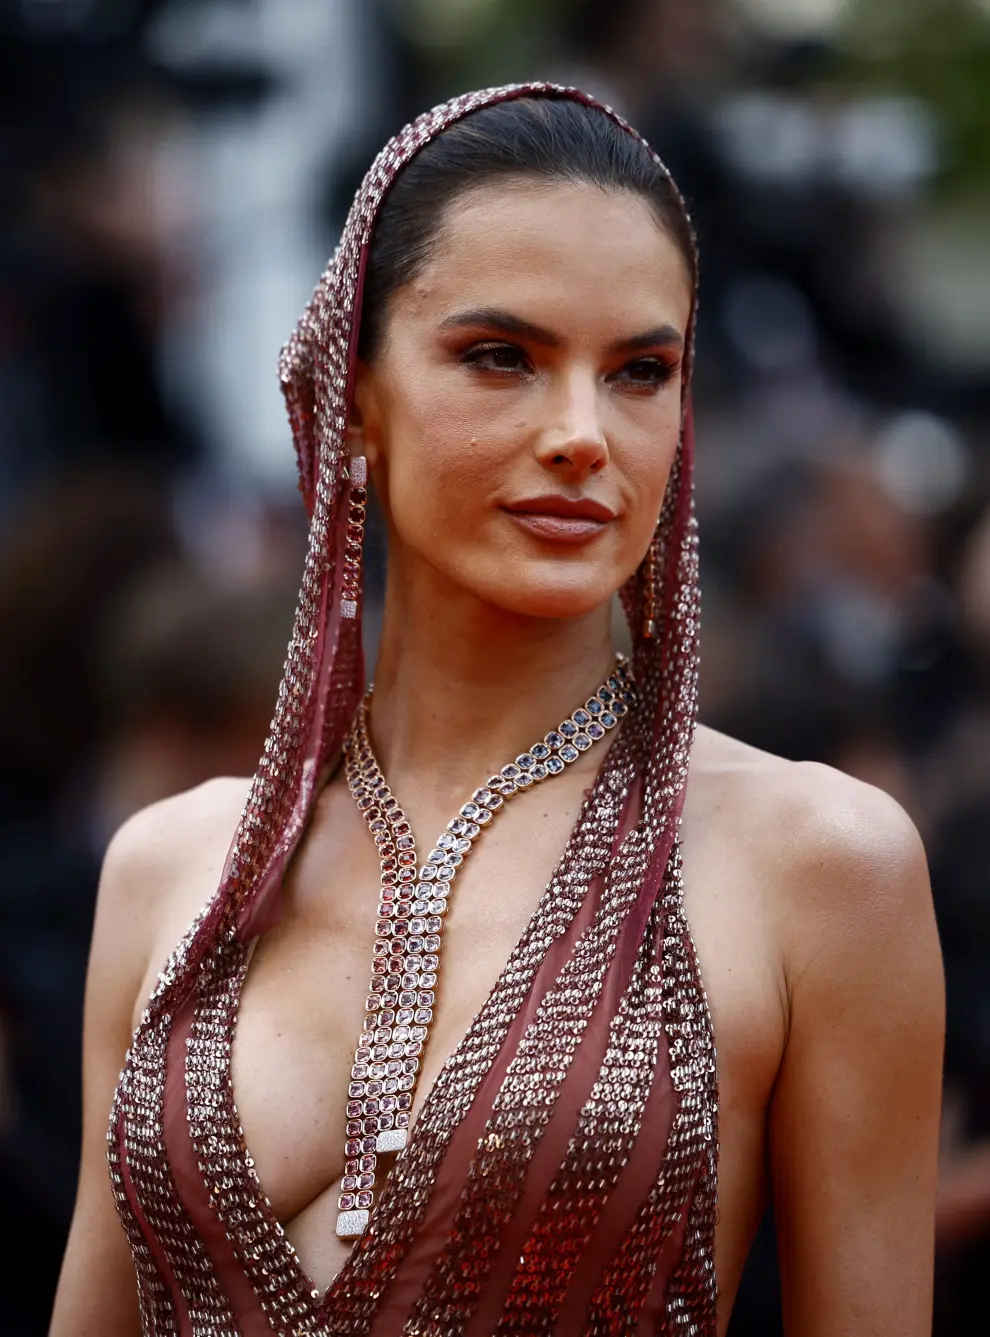 The 76th Cannes Film Festival - Opening ceremony and screening of the film "Jeanne du Barry" Out of competition - Red Carpet arrivals - Cannes, France, May 16, 2023. Alessandra Ambrosio poses. REUTERS/Eric Gaillard FILMFESTIVAL-CANNES/OPENING RED CARPET